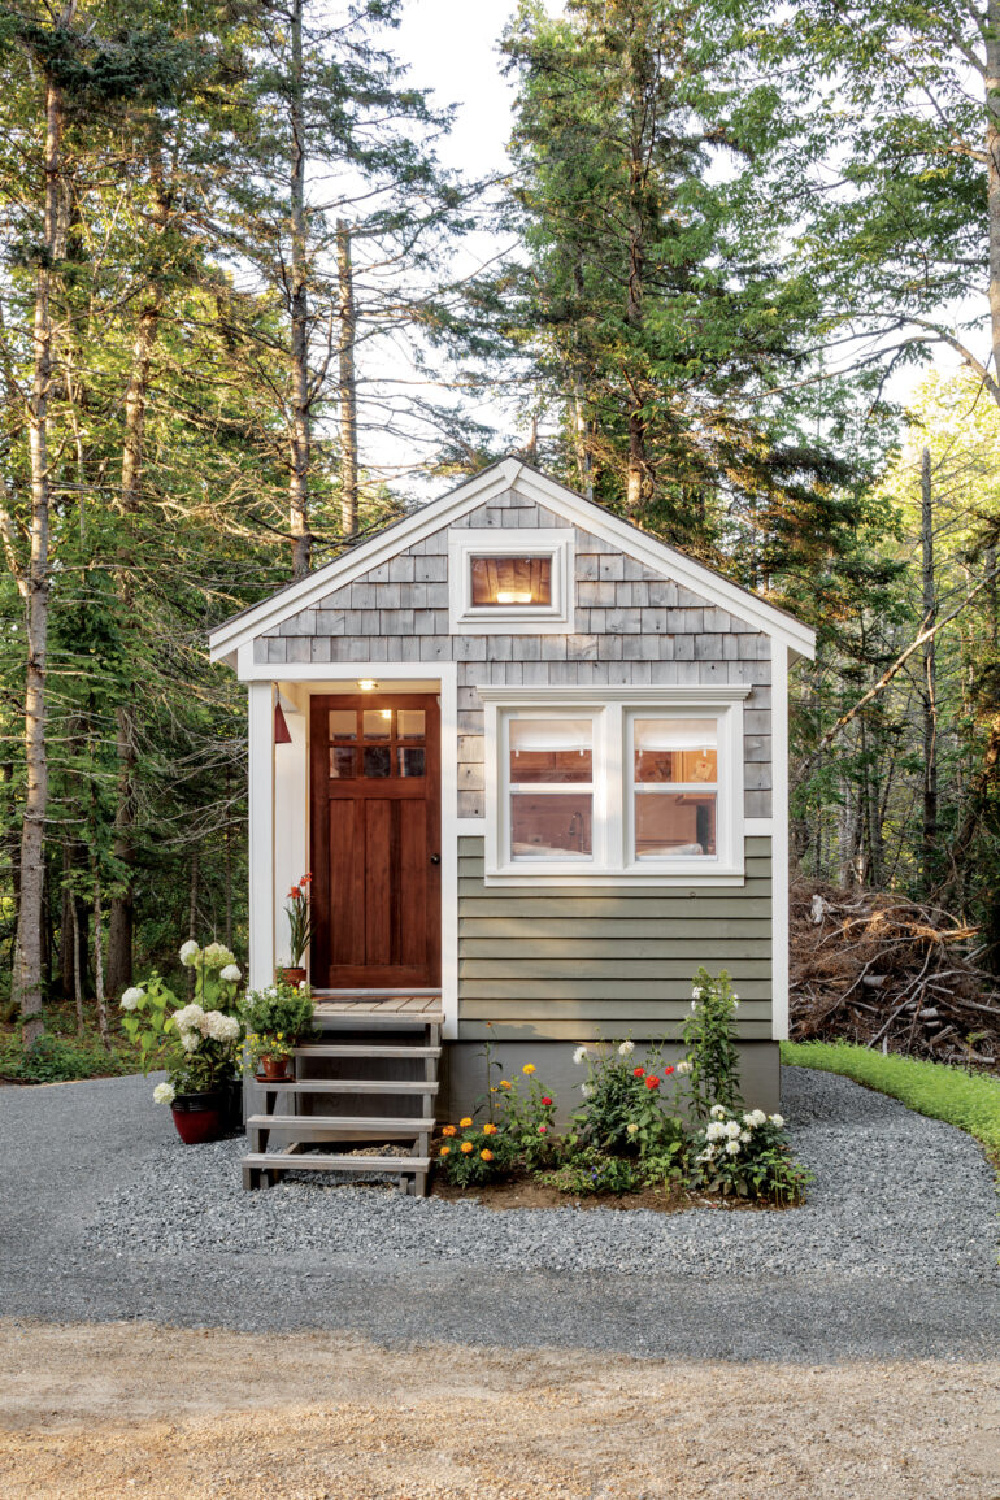 Tiny house cottage with cedar shake shingles and sage green siding  in the woods in Maine - @downeast. #tinyhouses #tinycottages #mainecottage